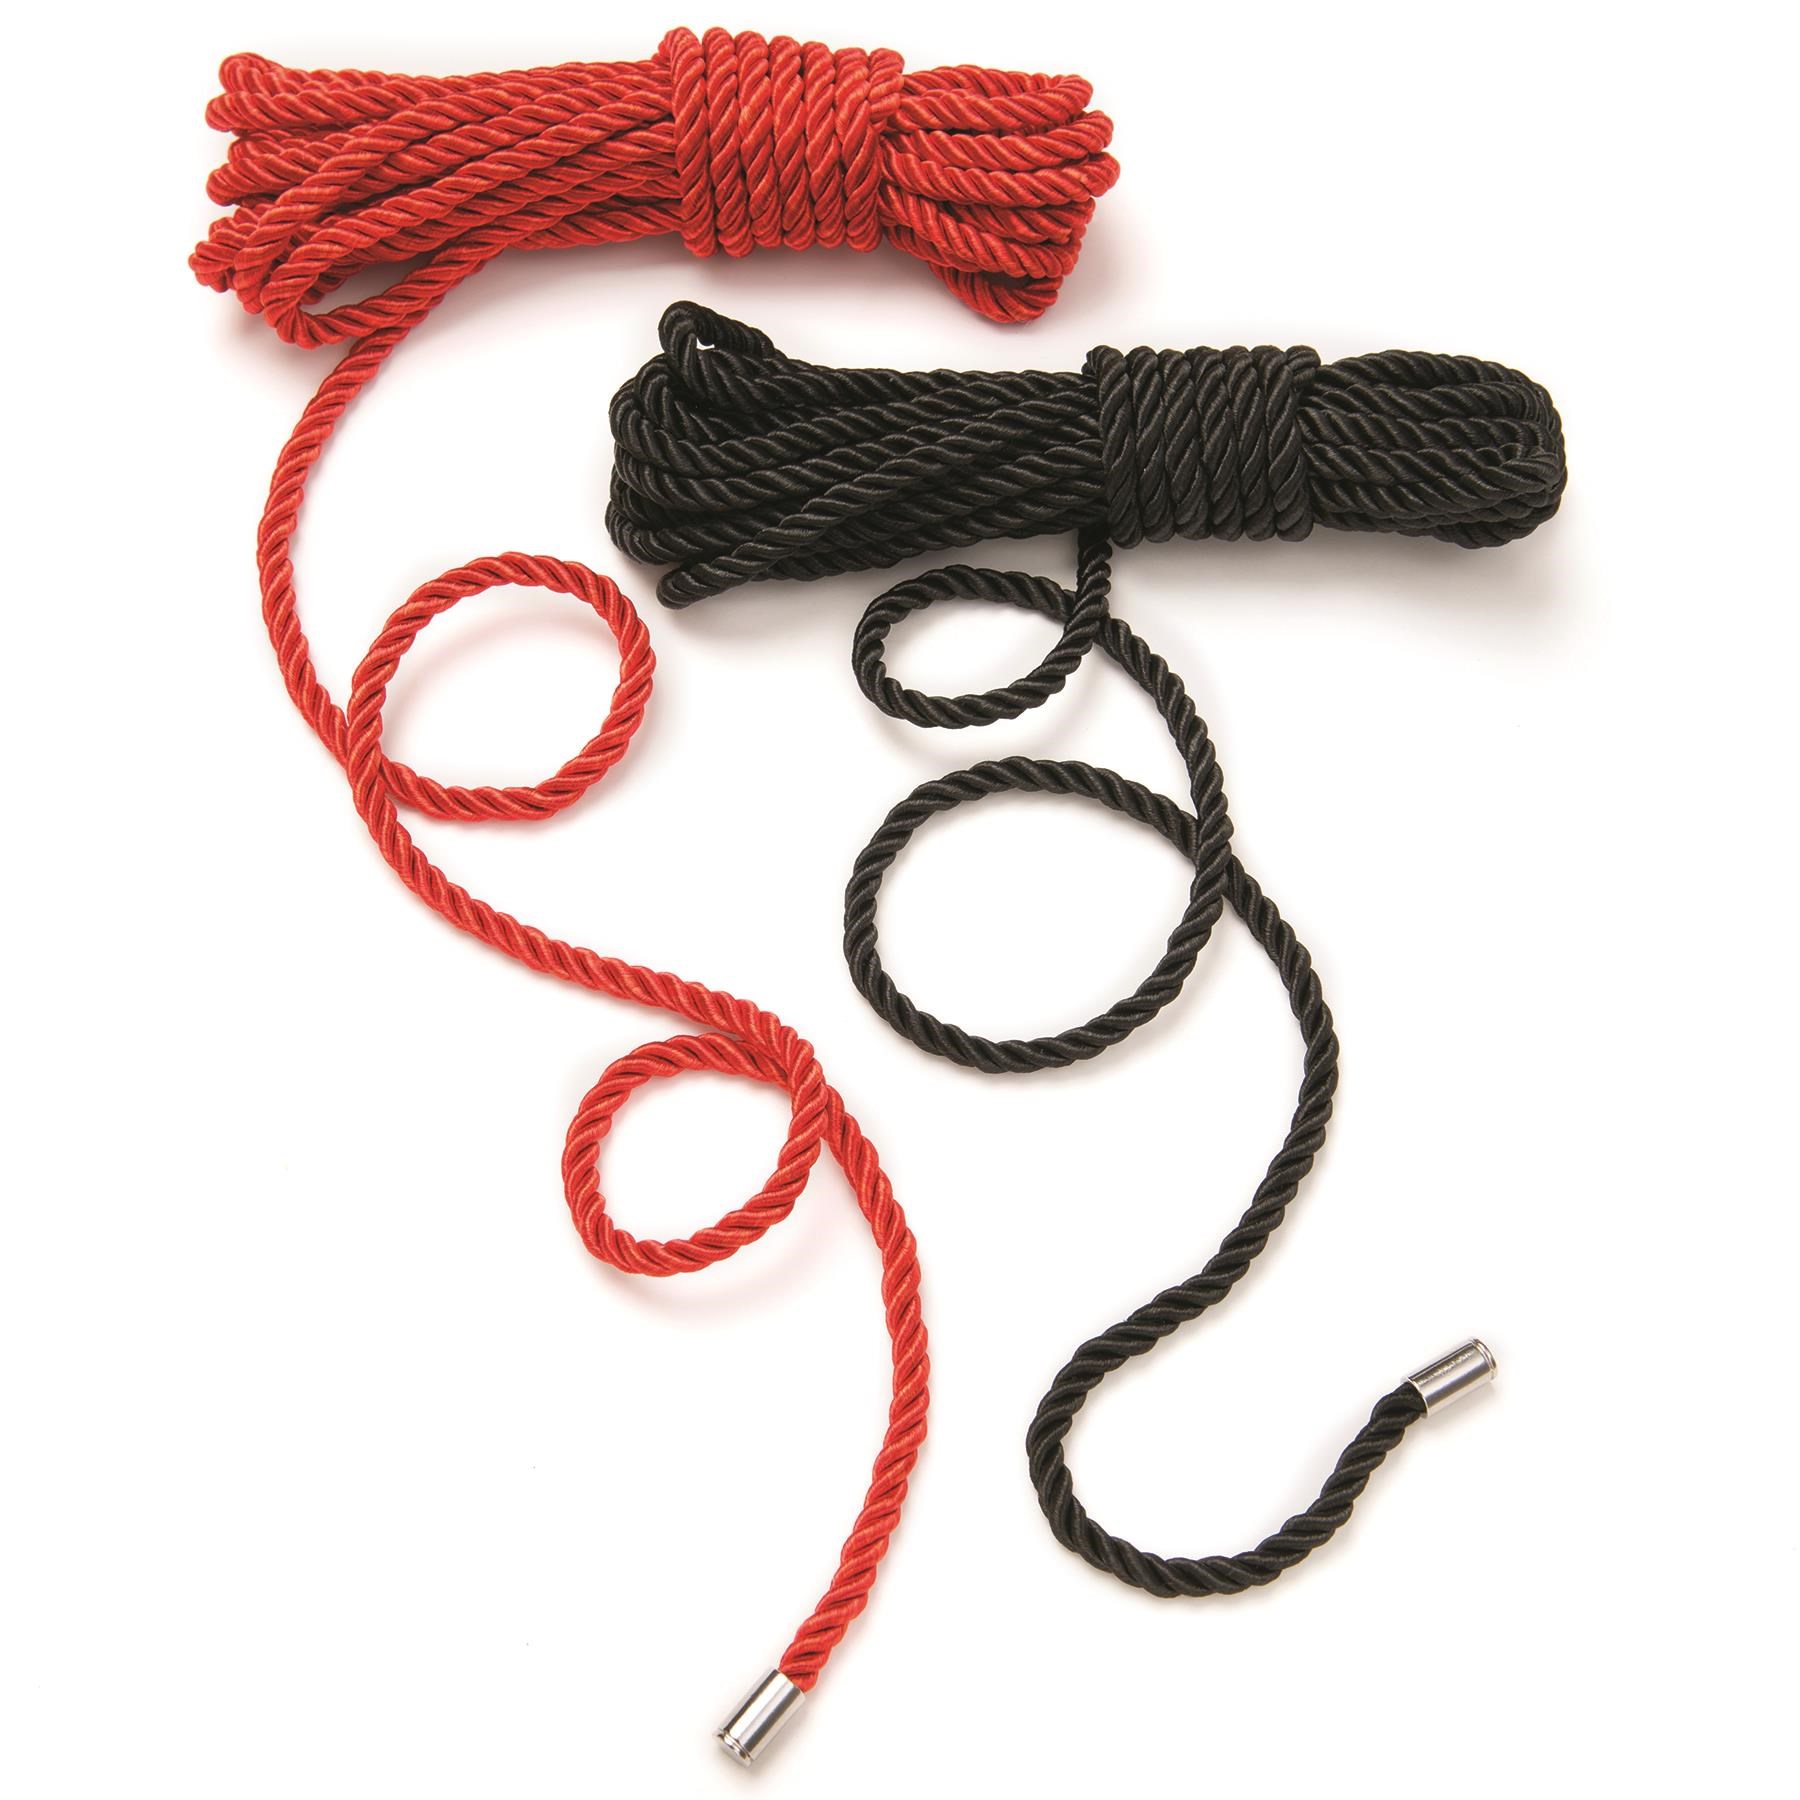 Fifty Shades of Grey Restrain Me Bondage Rope Twin Pack Product Shot #3